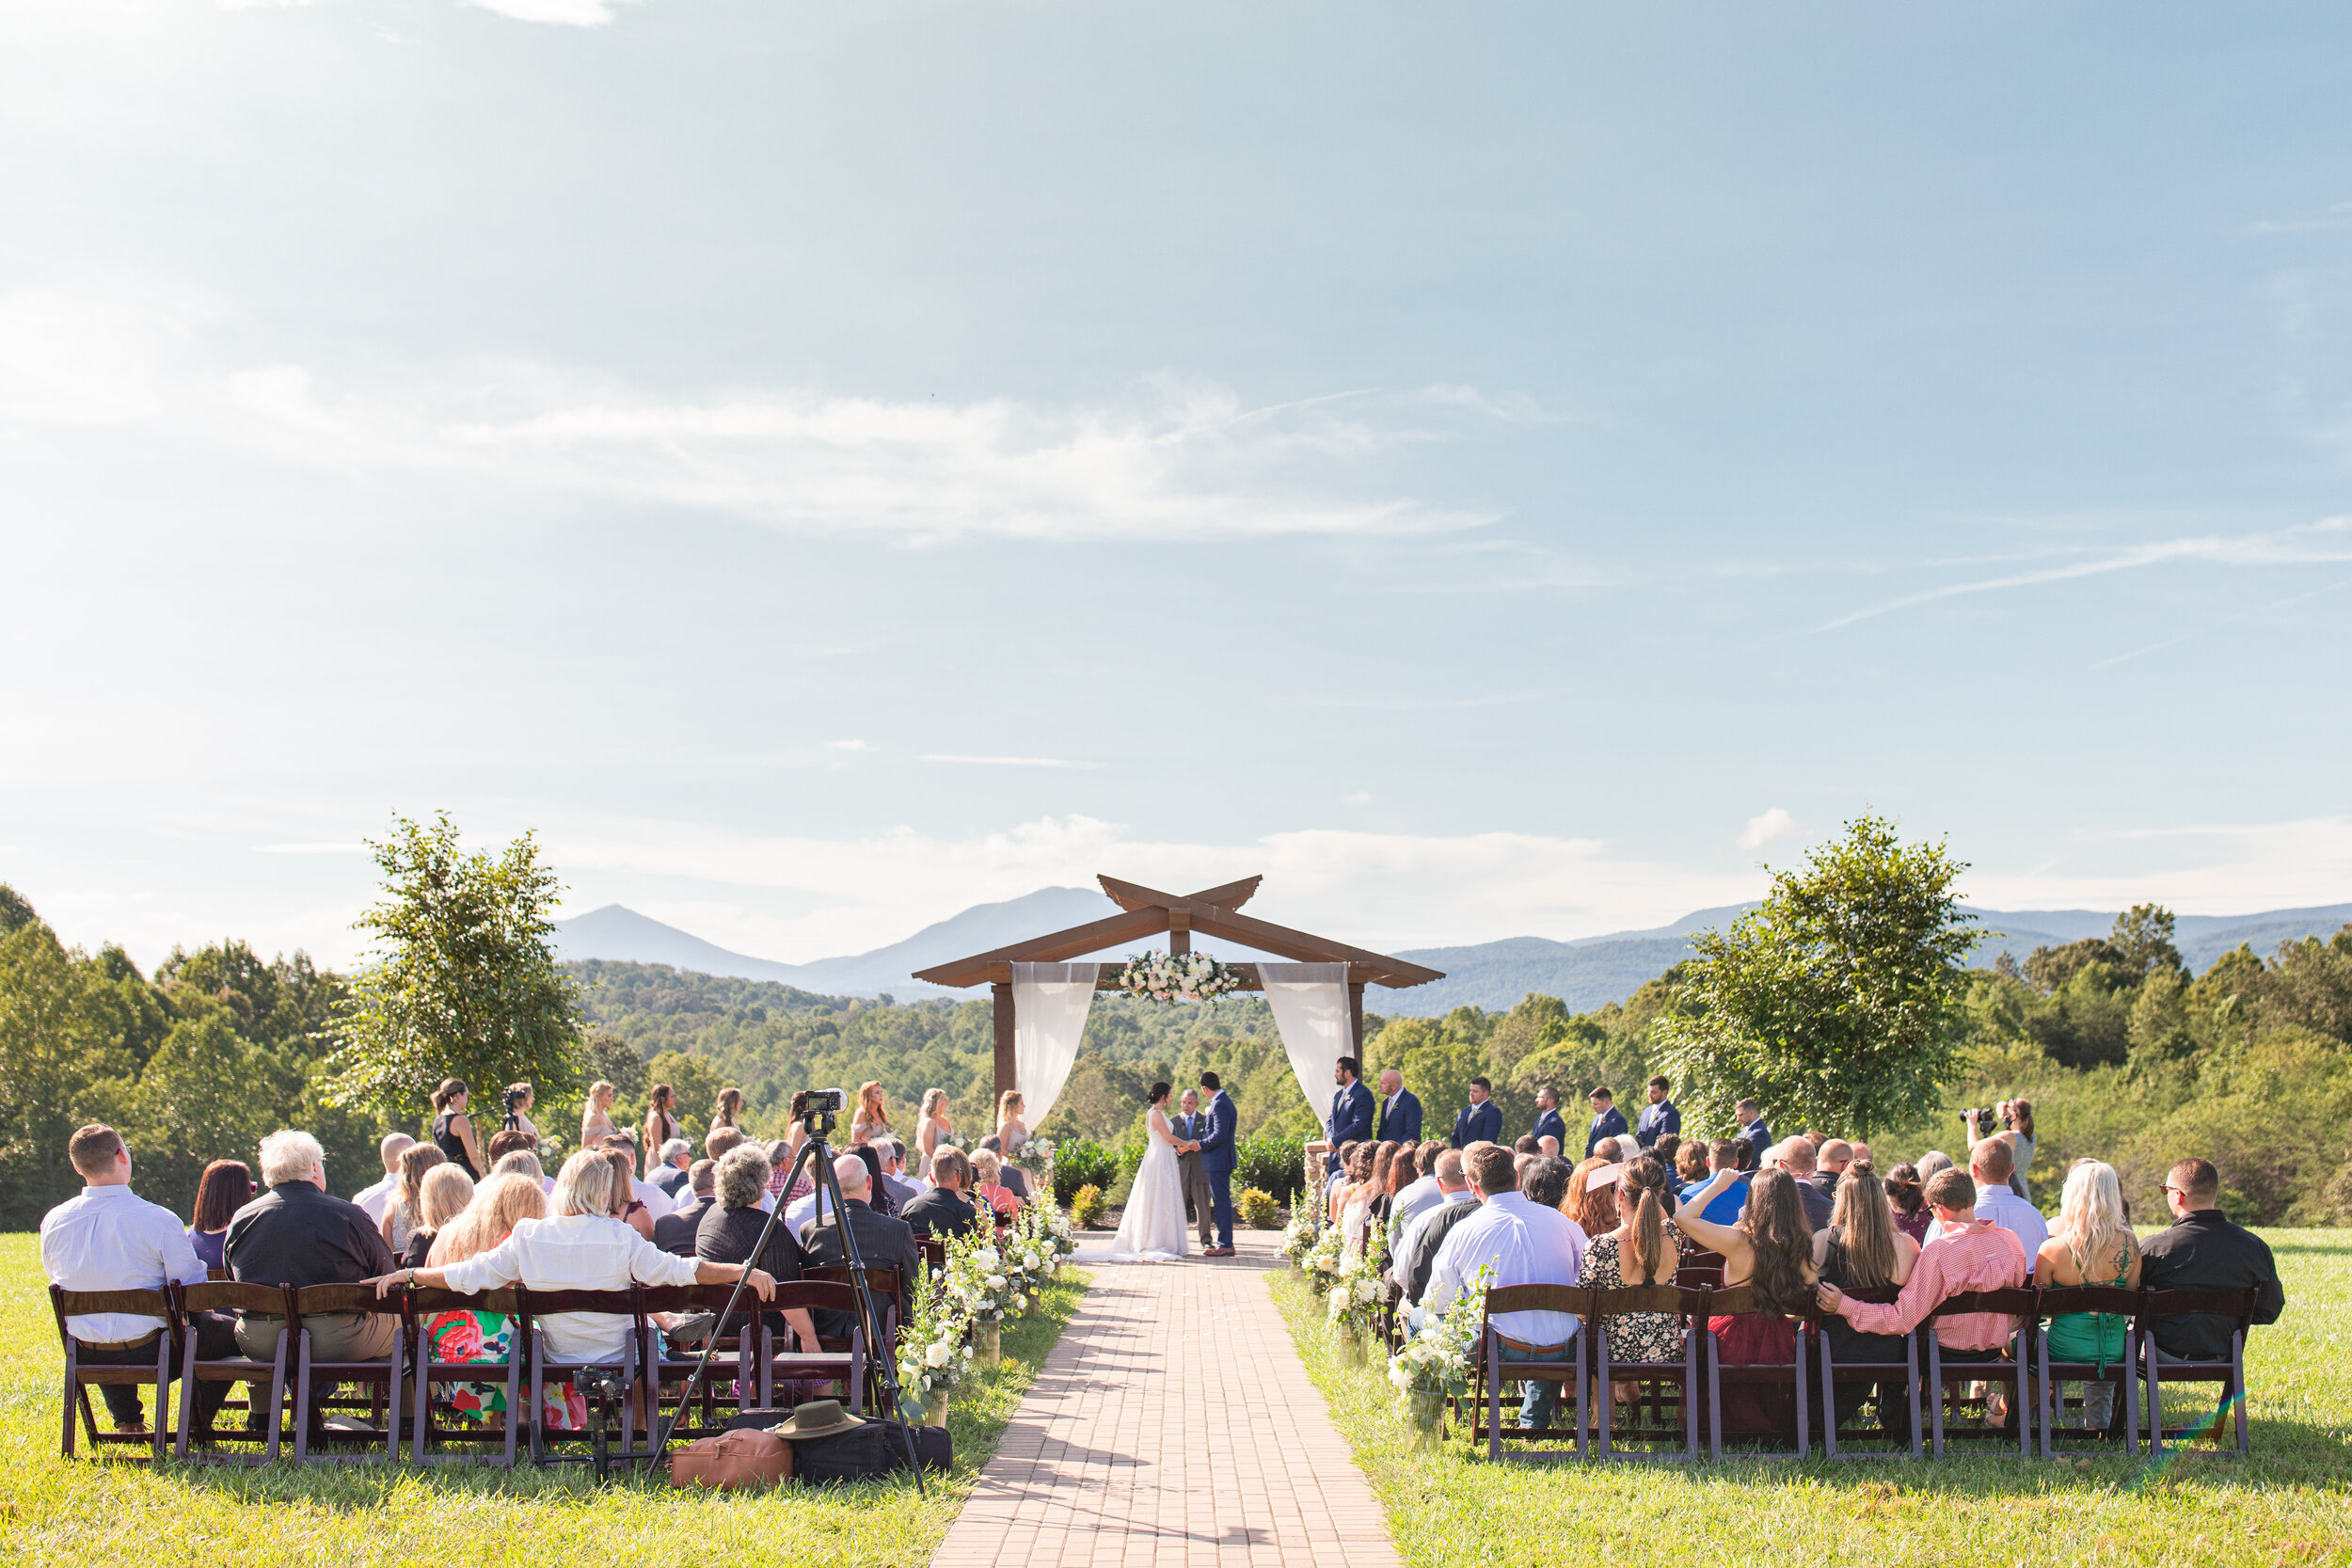 The Best Time to Start Your Ceremony | Lynchburg Wedding Photographer